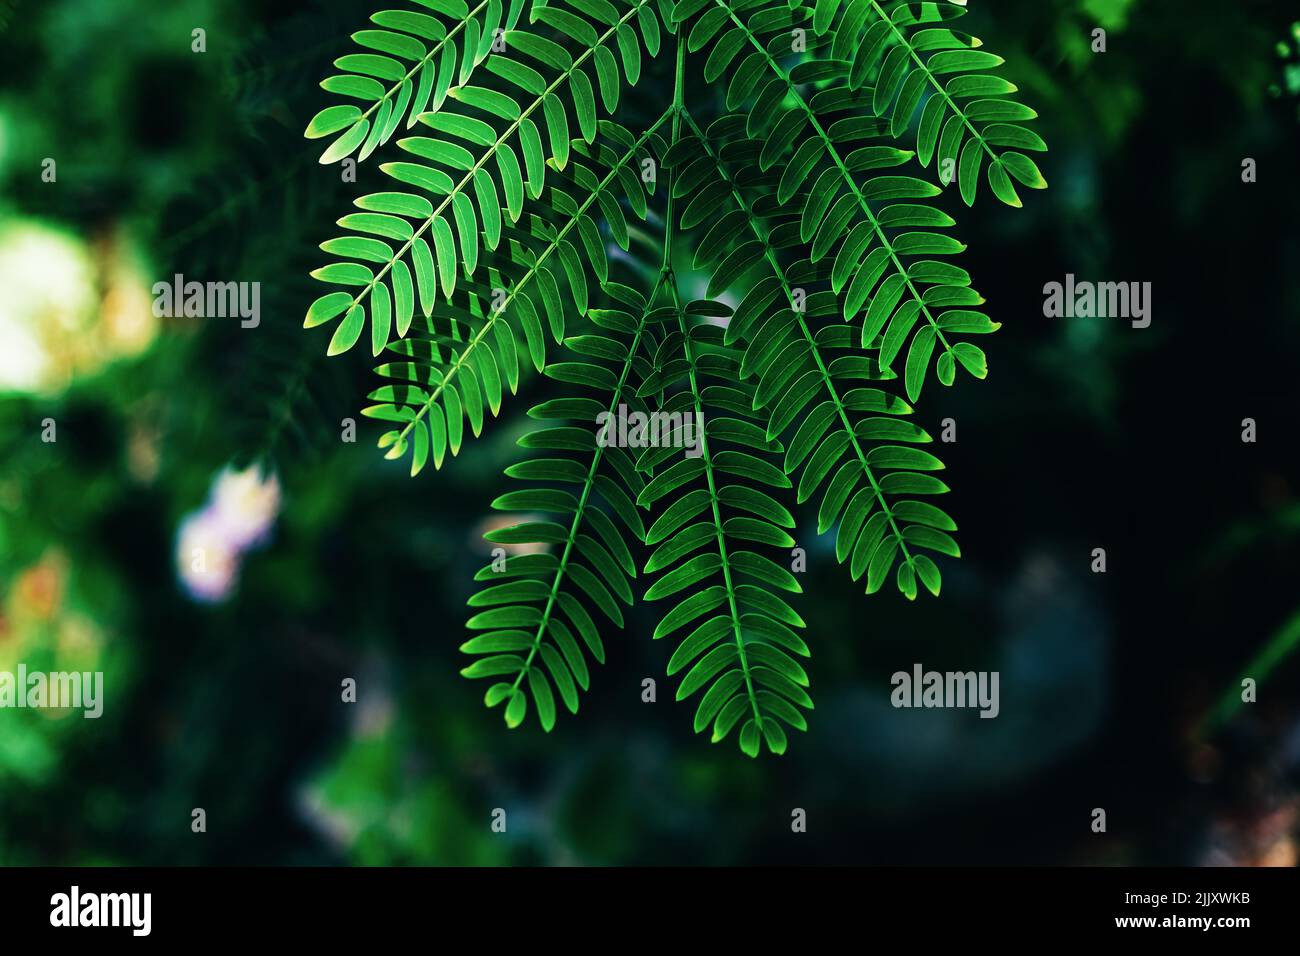 Natural green leaves close-up tropical plant background. Stock Photo